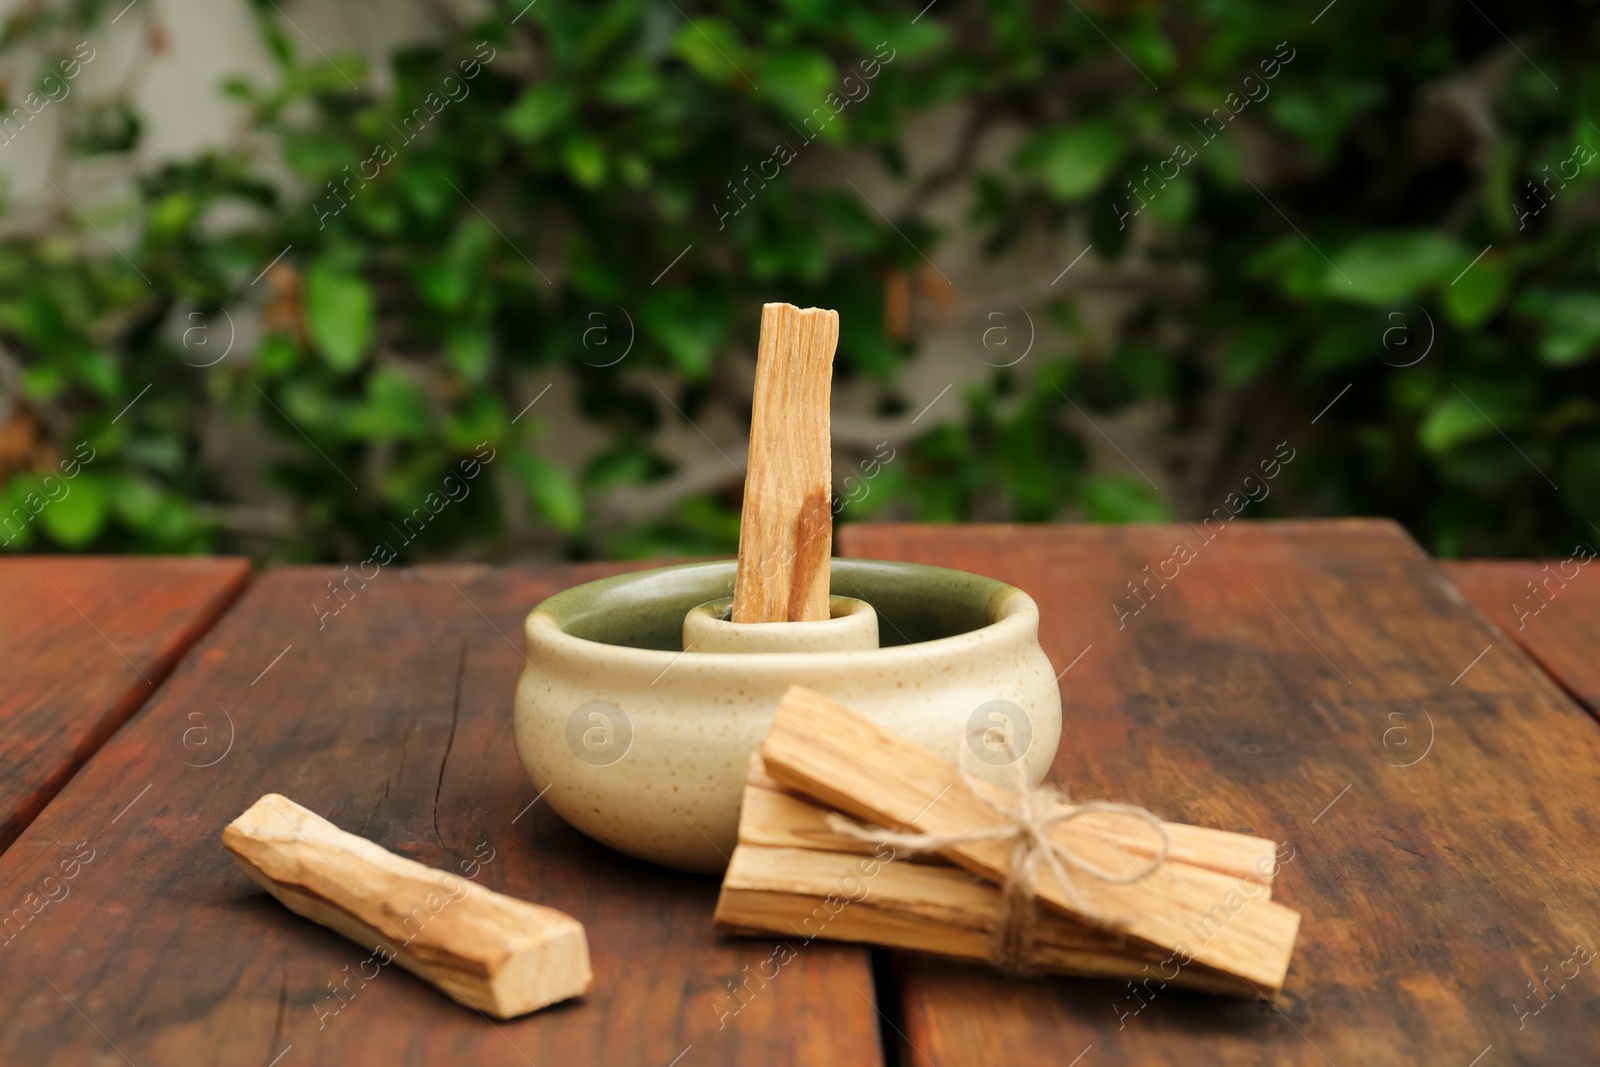 Photo of Palo Santo (holy wood) sticks and holder on wooden table outdoors